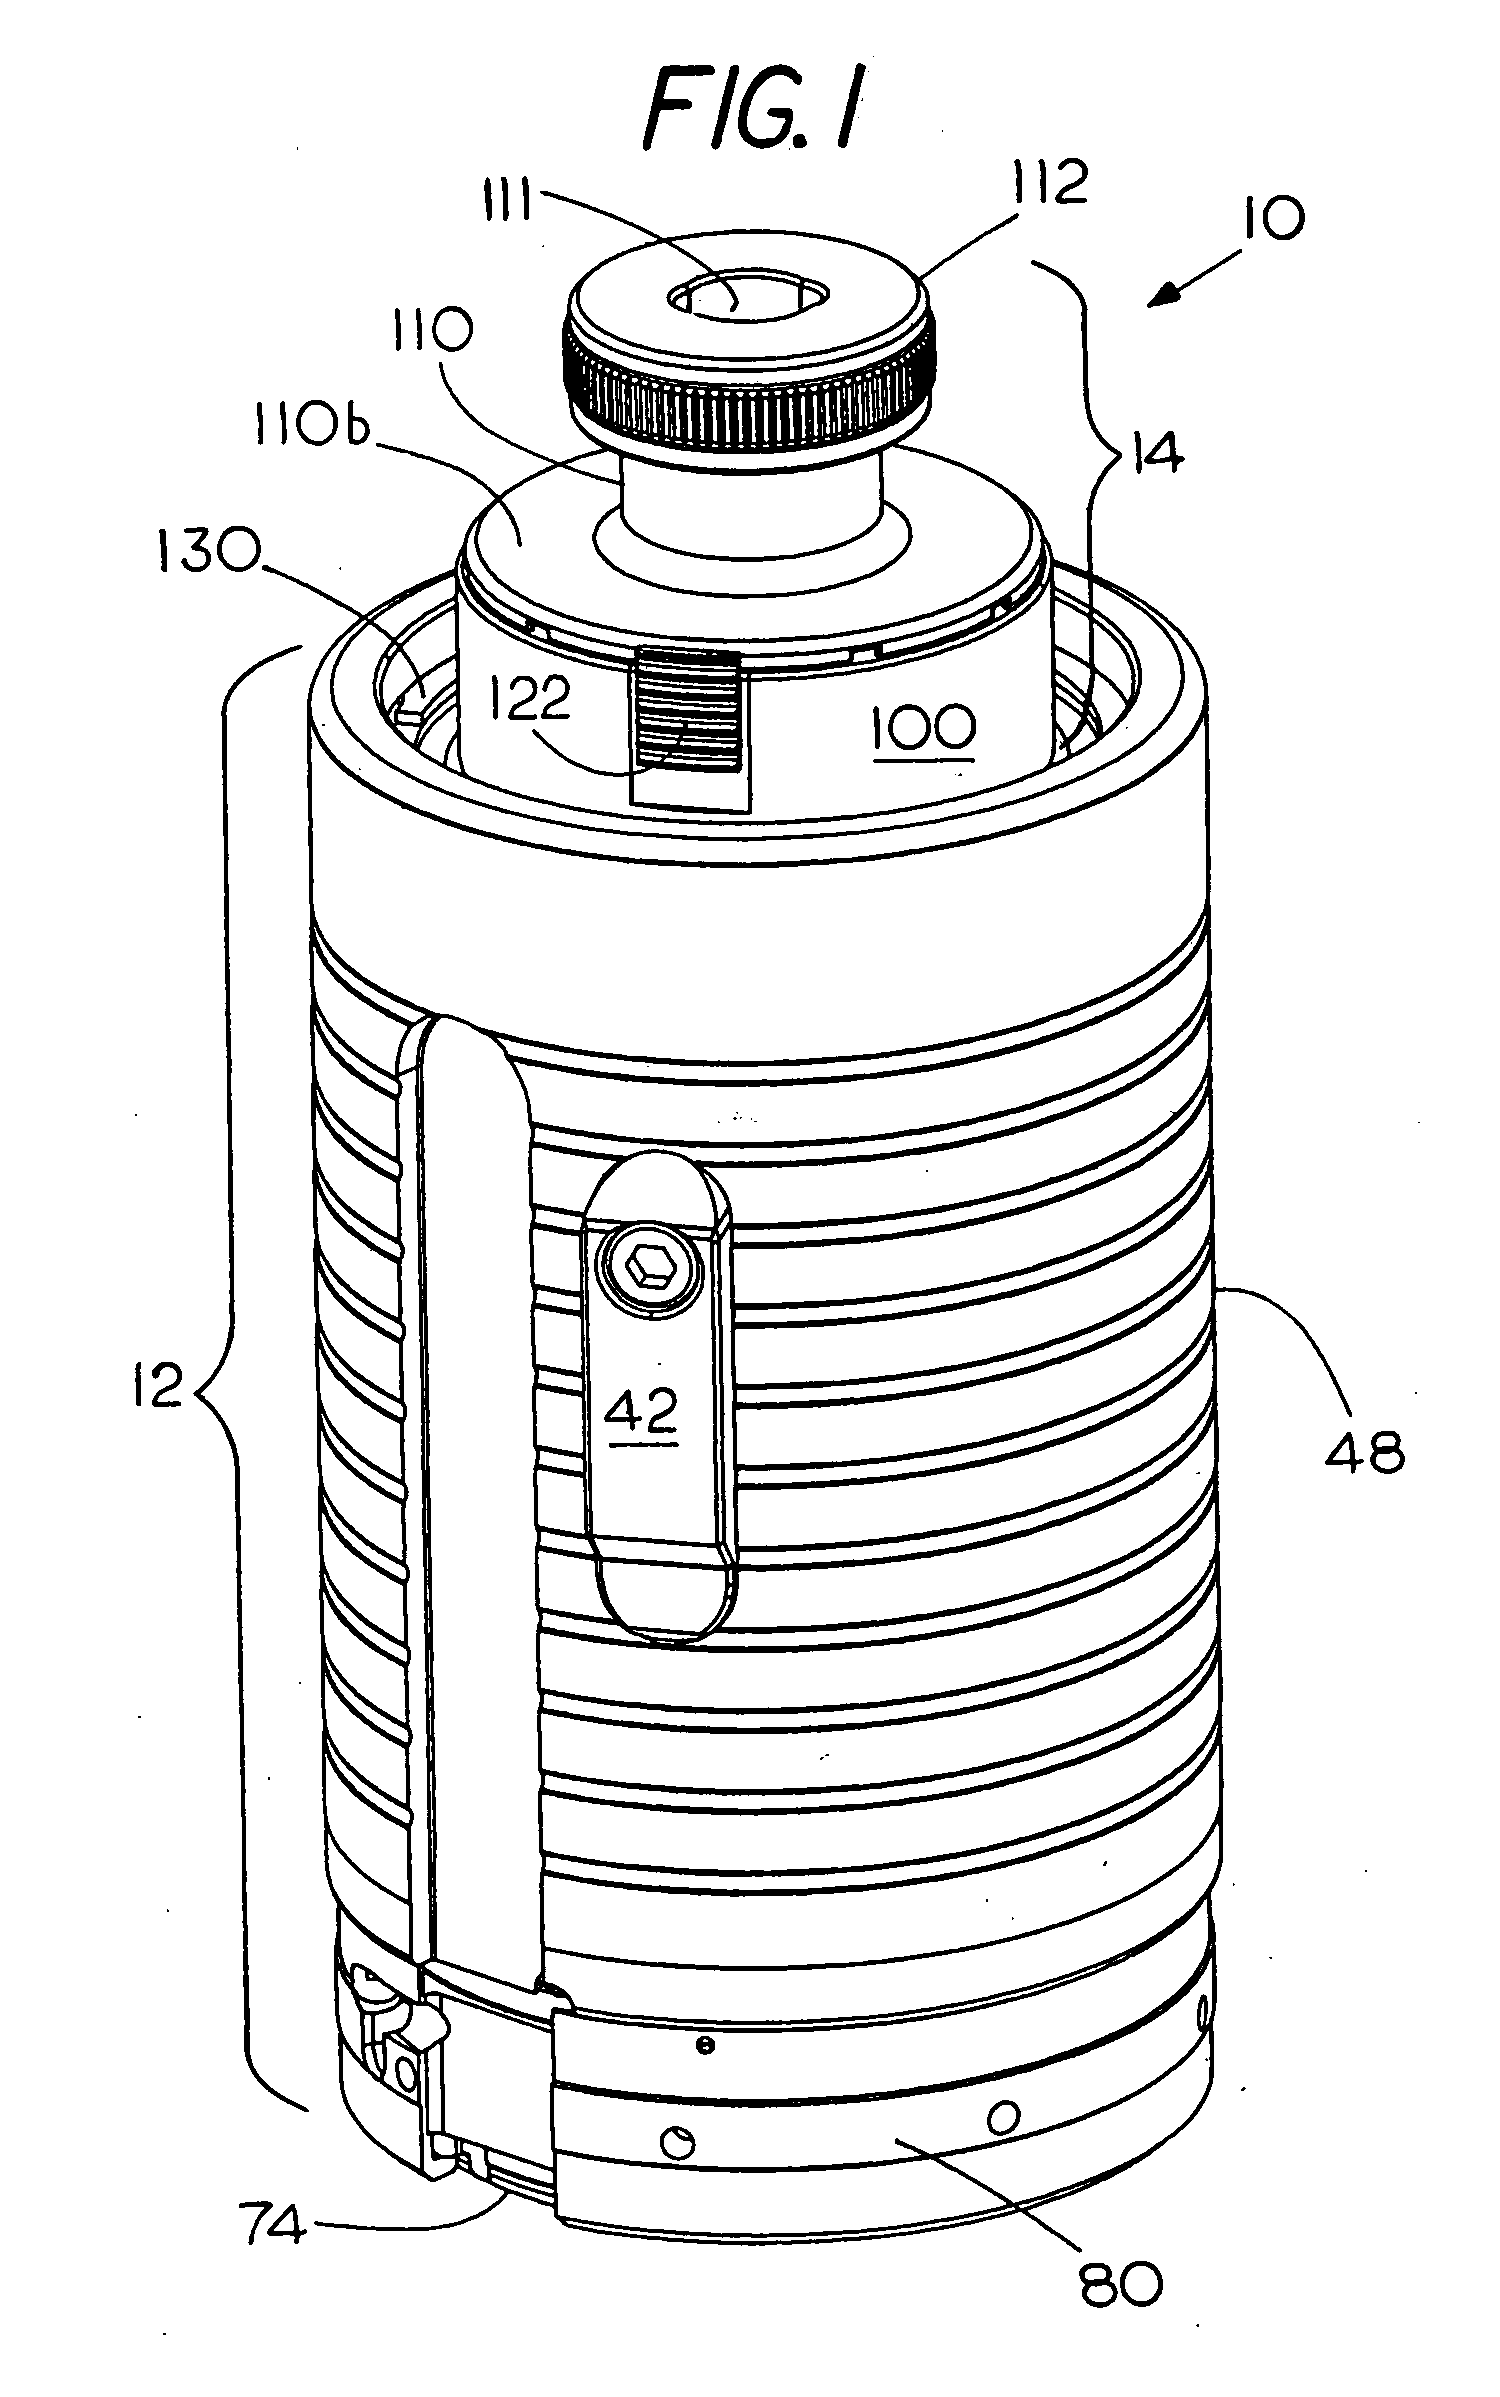 Punch device with adjustment subassembly as retrofit insert or as original equipment